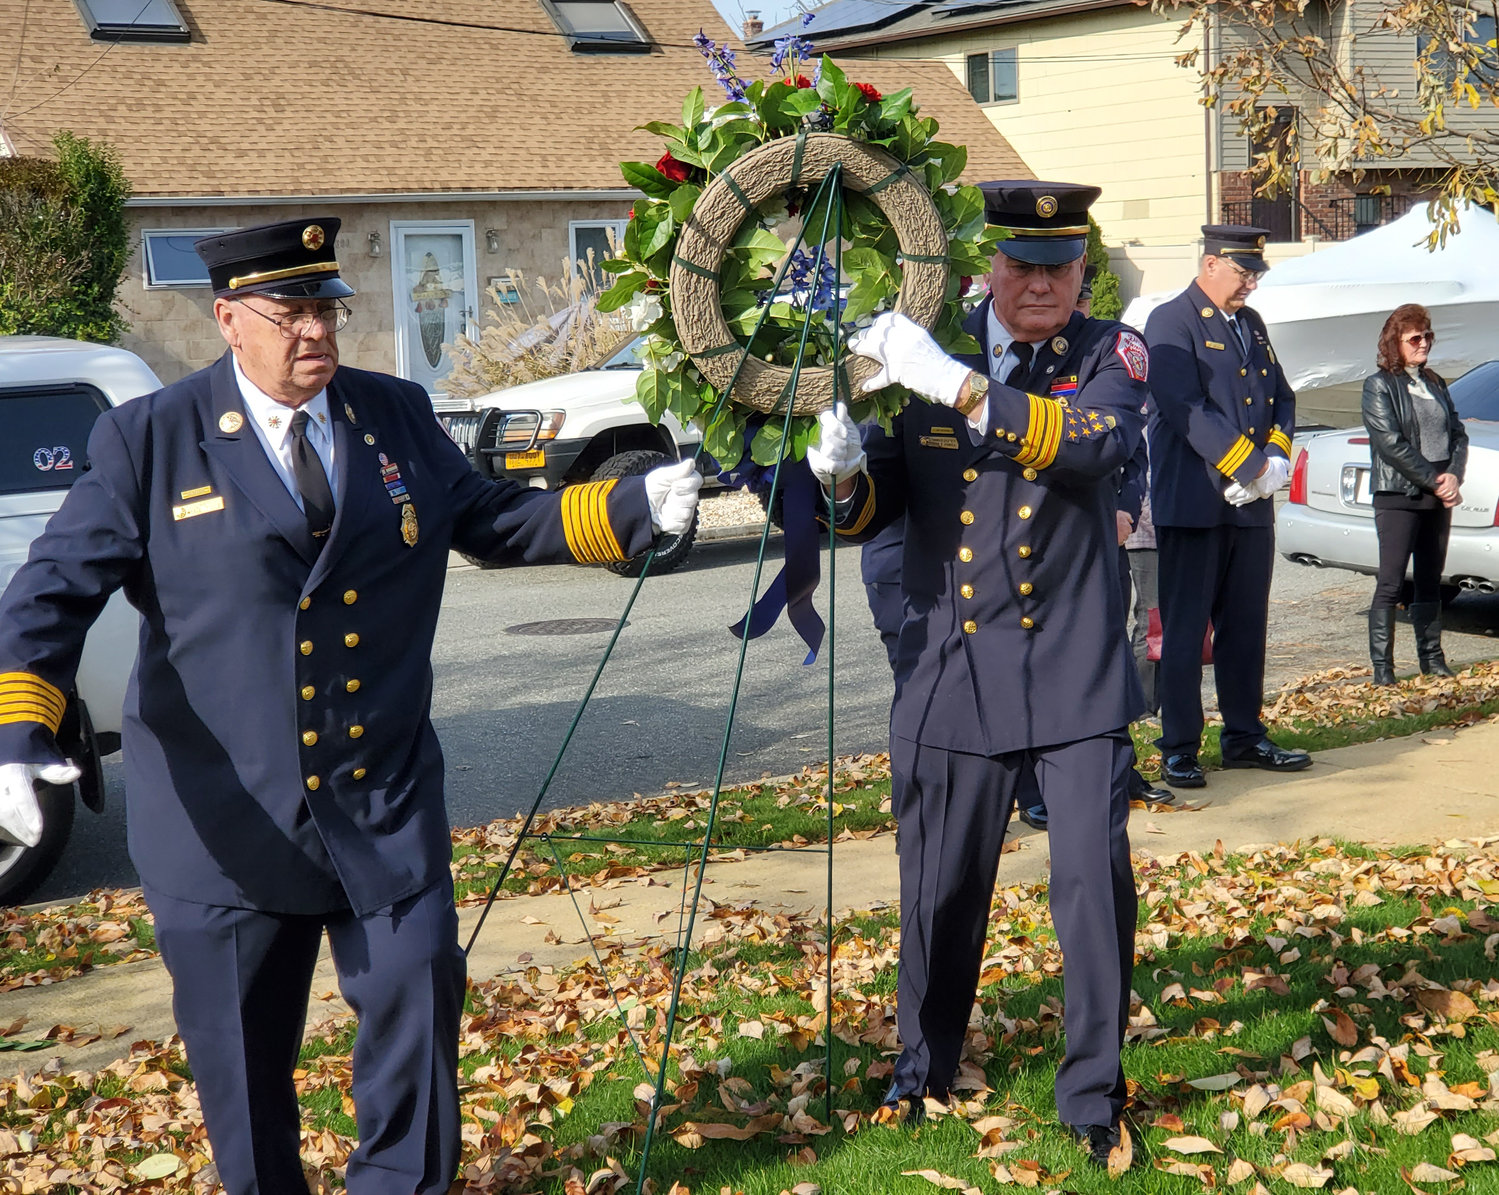 Members of the Seaford Fire Department presented a wreath during the service.